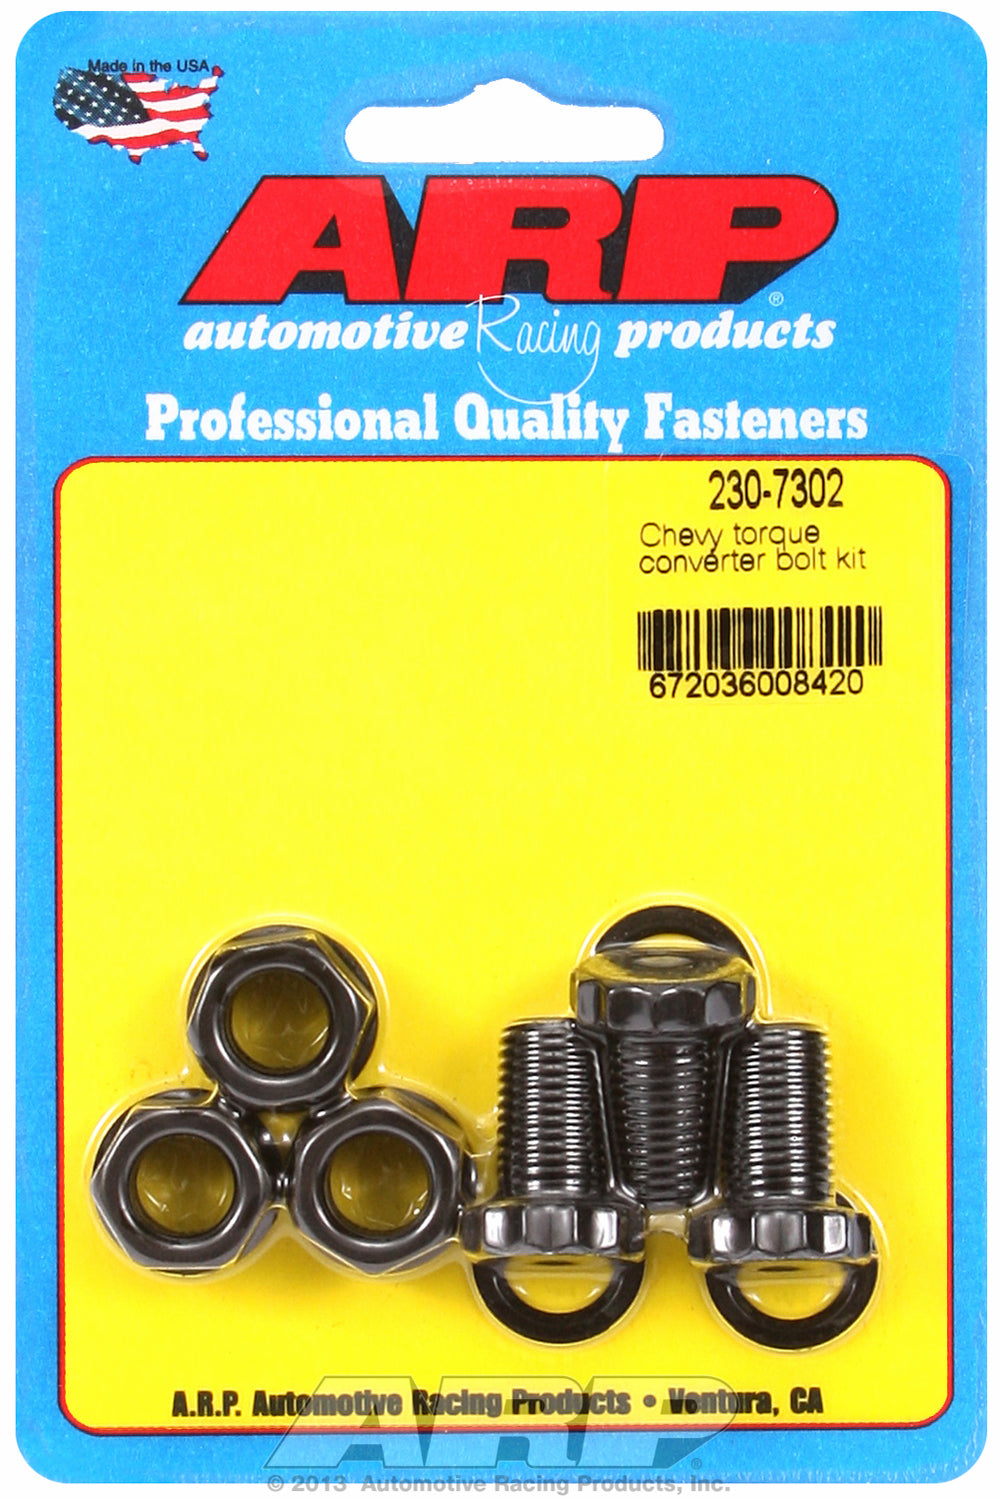 Pro Series Torque Converter Bolts for GM Powerglide, TH350 & TH400 w/ most aftermarket converter